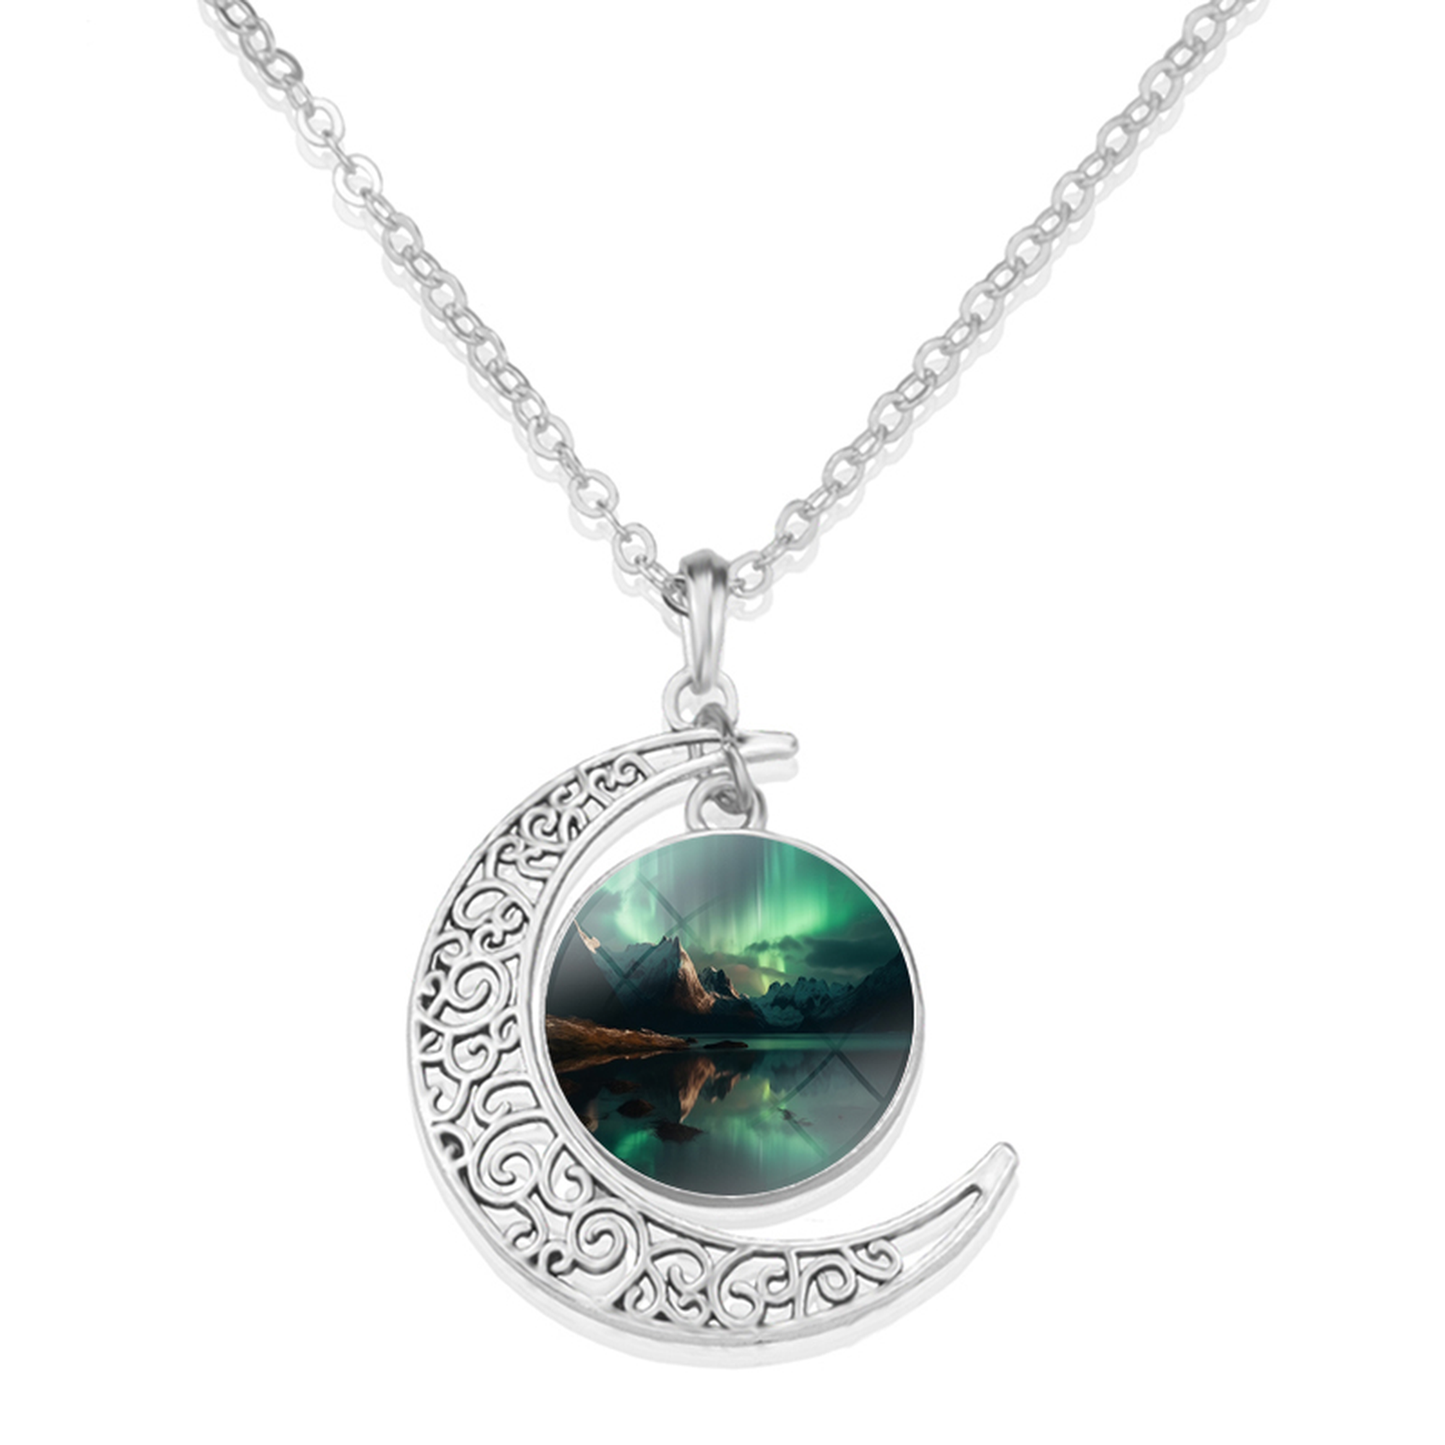 Unique Aurora Borealis Crescent Necklace - Northern Light Jewelry - Crescent Glass Cabochon Pendent Necklace - Perfect Aurora Lovers Gift 8